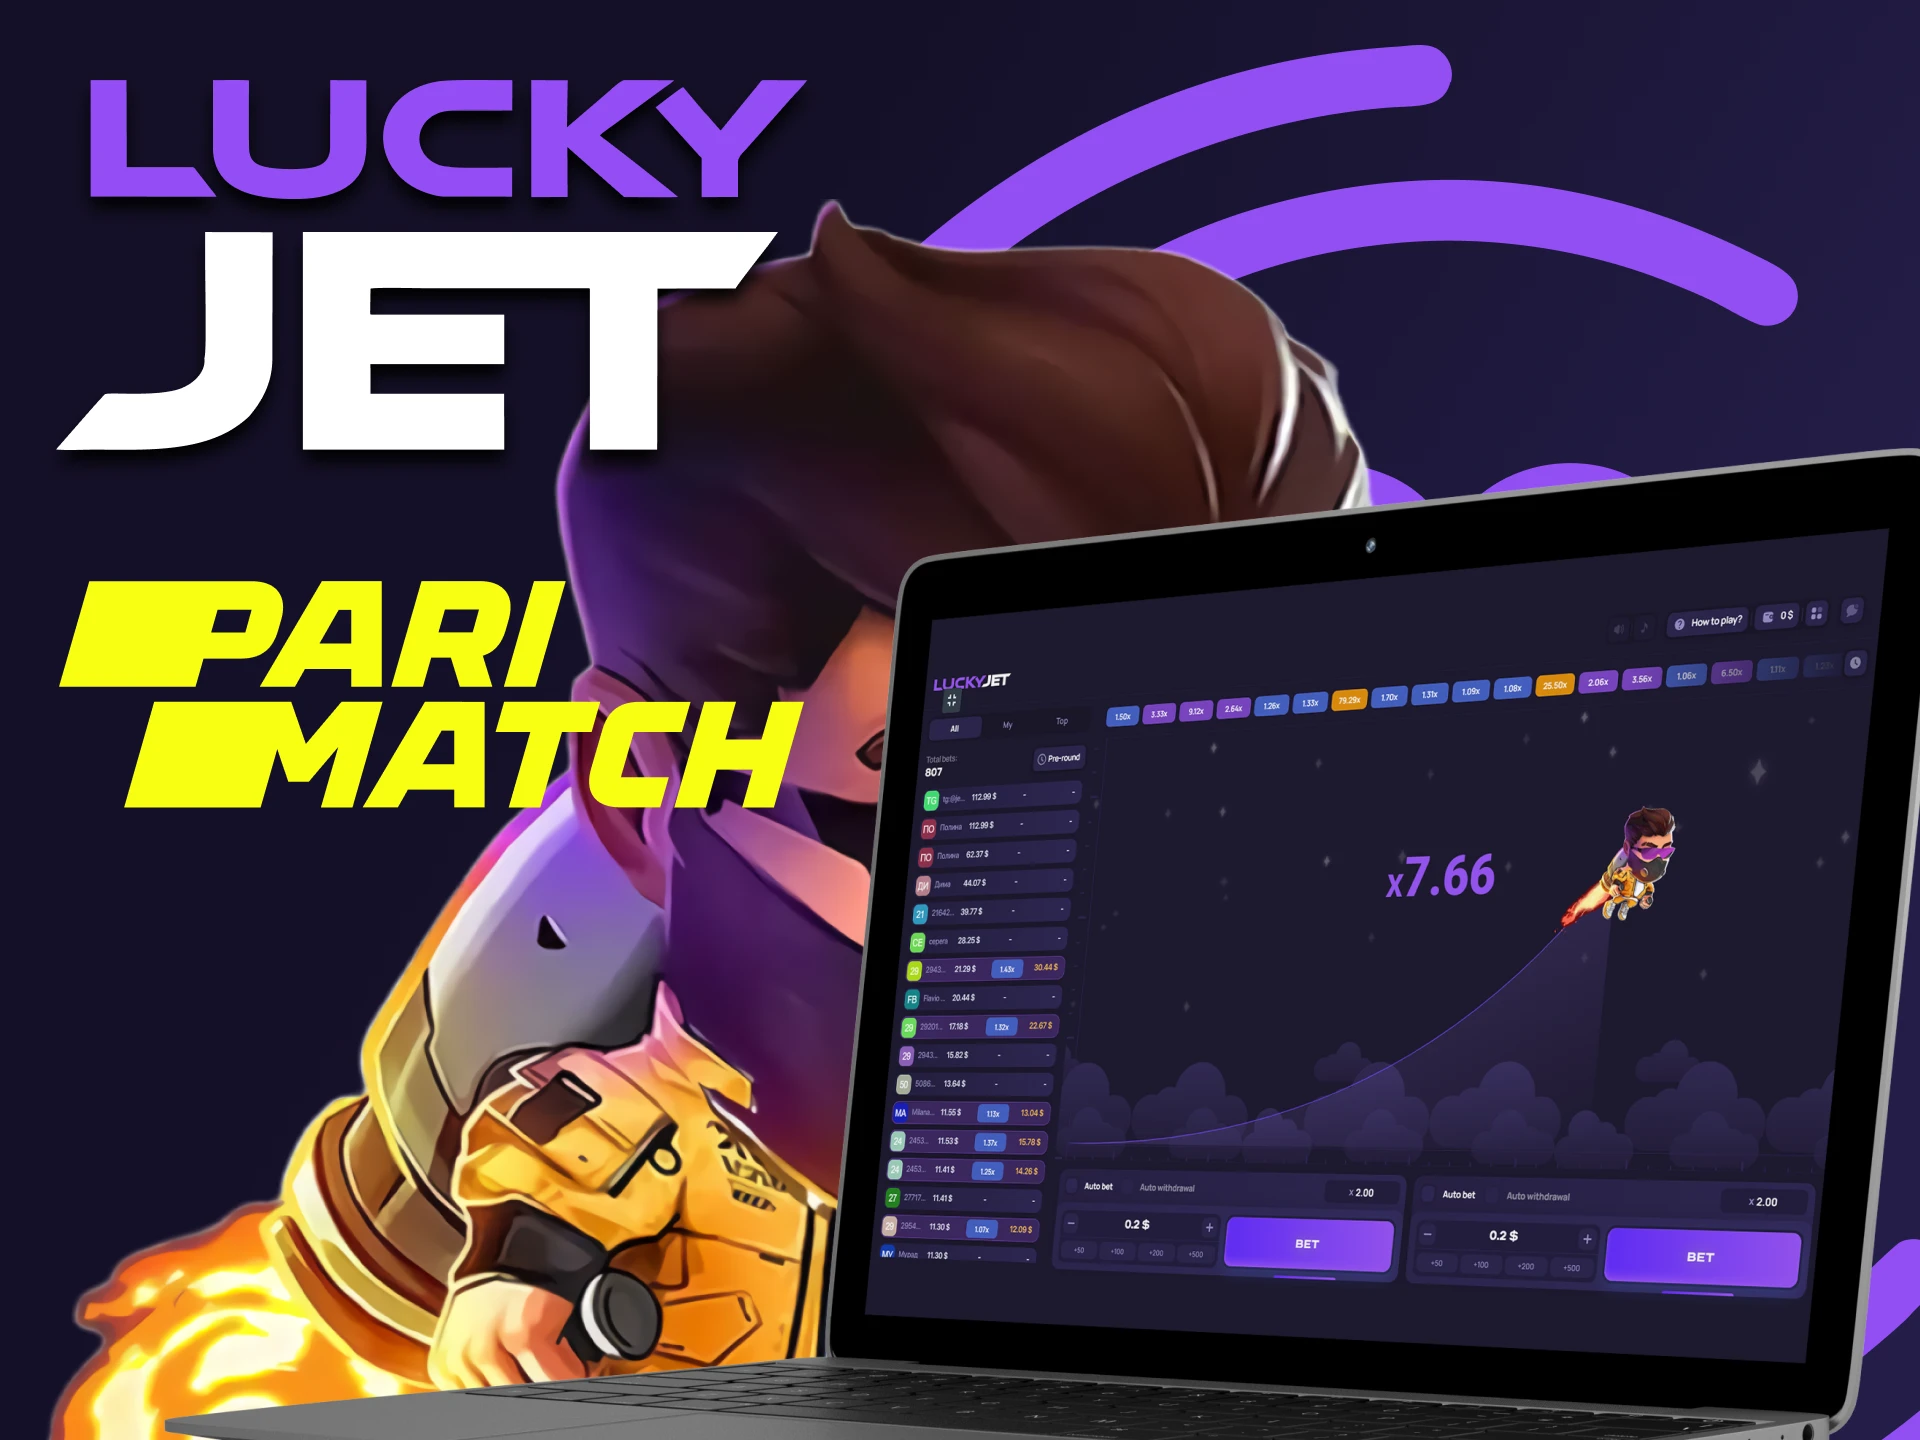 You can try the Lucky Jet game on Parimatch.